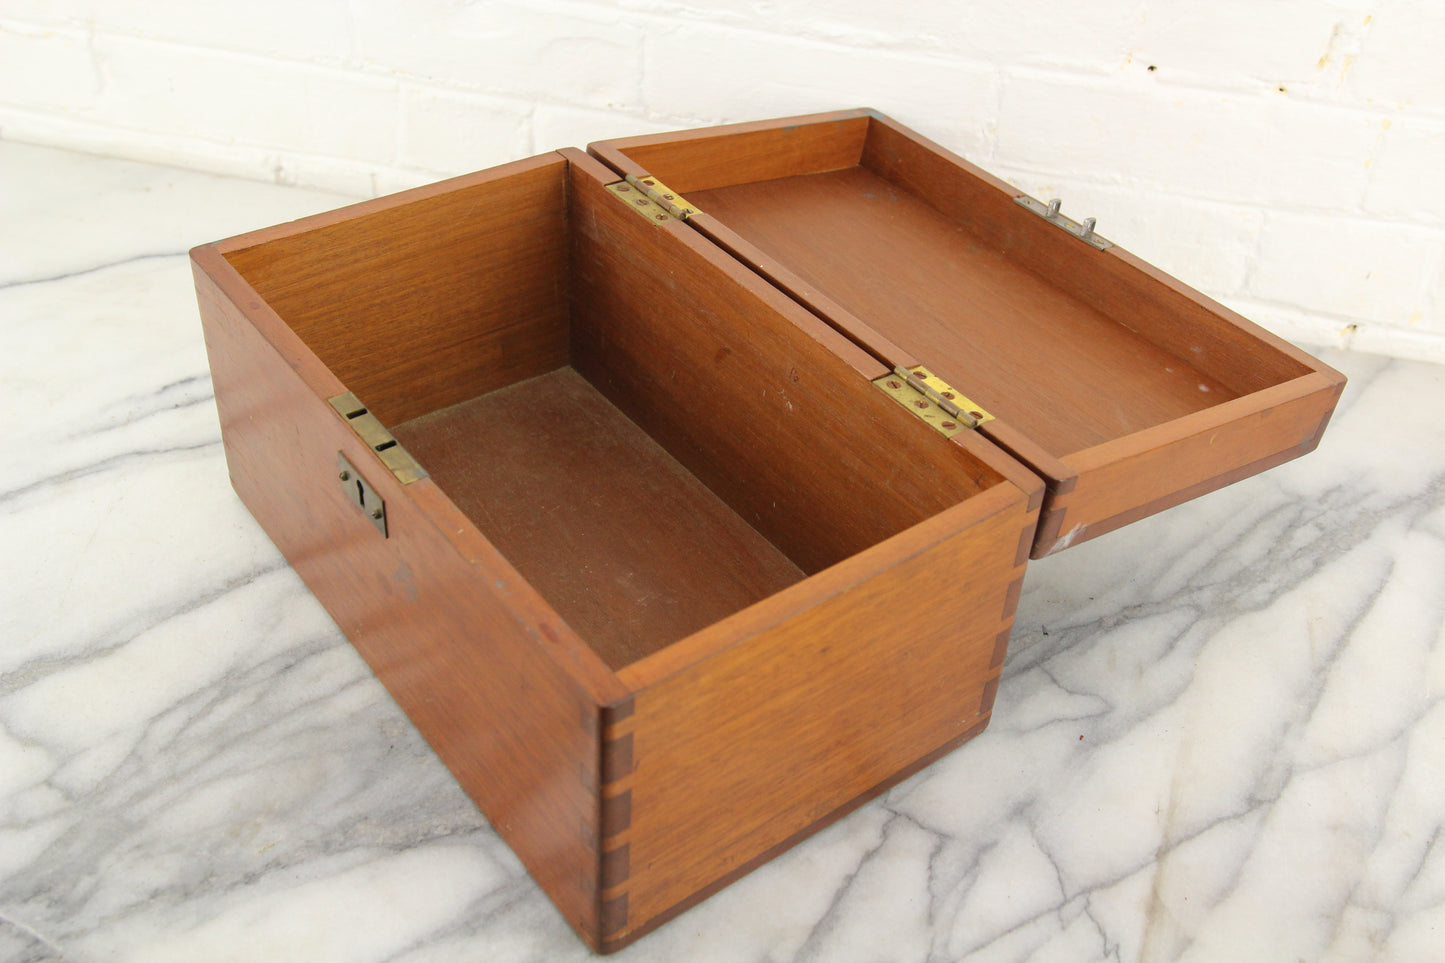 Wooden Dovetailed Storage Box with Keyhole - 13 x 8 x 7"